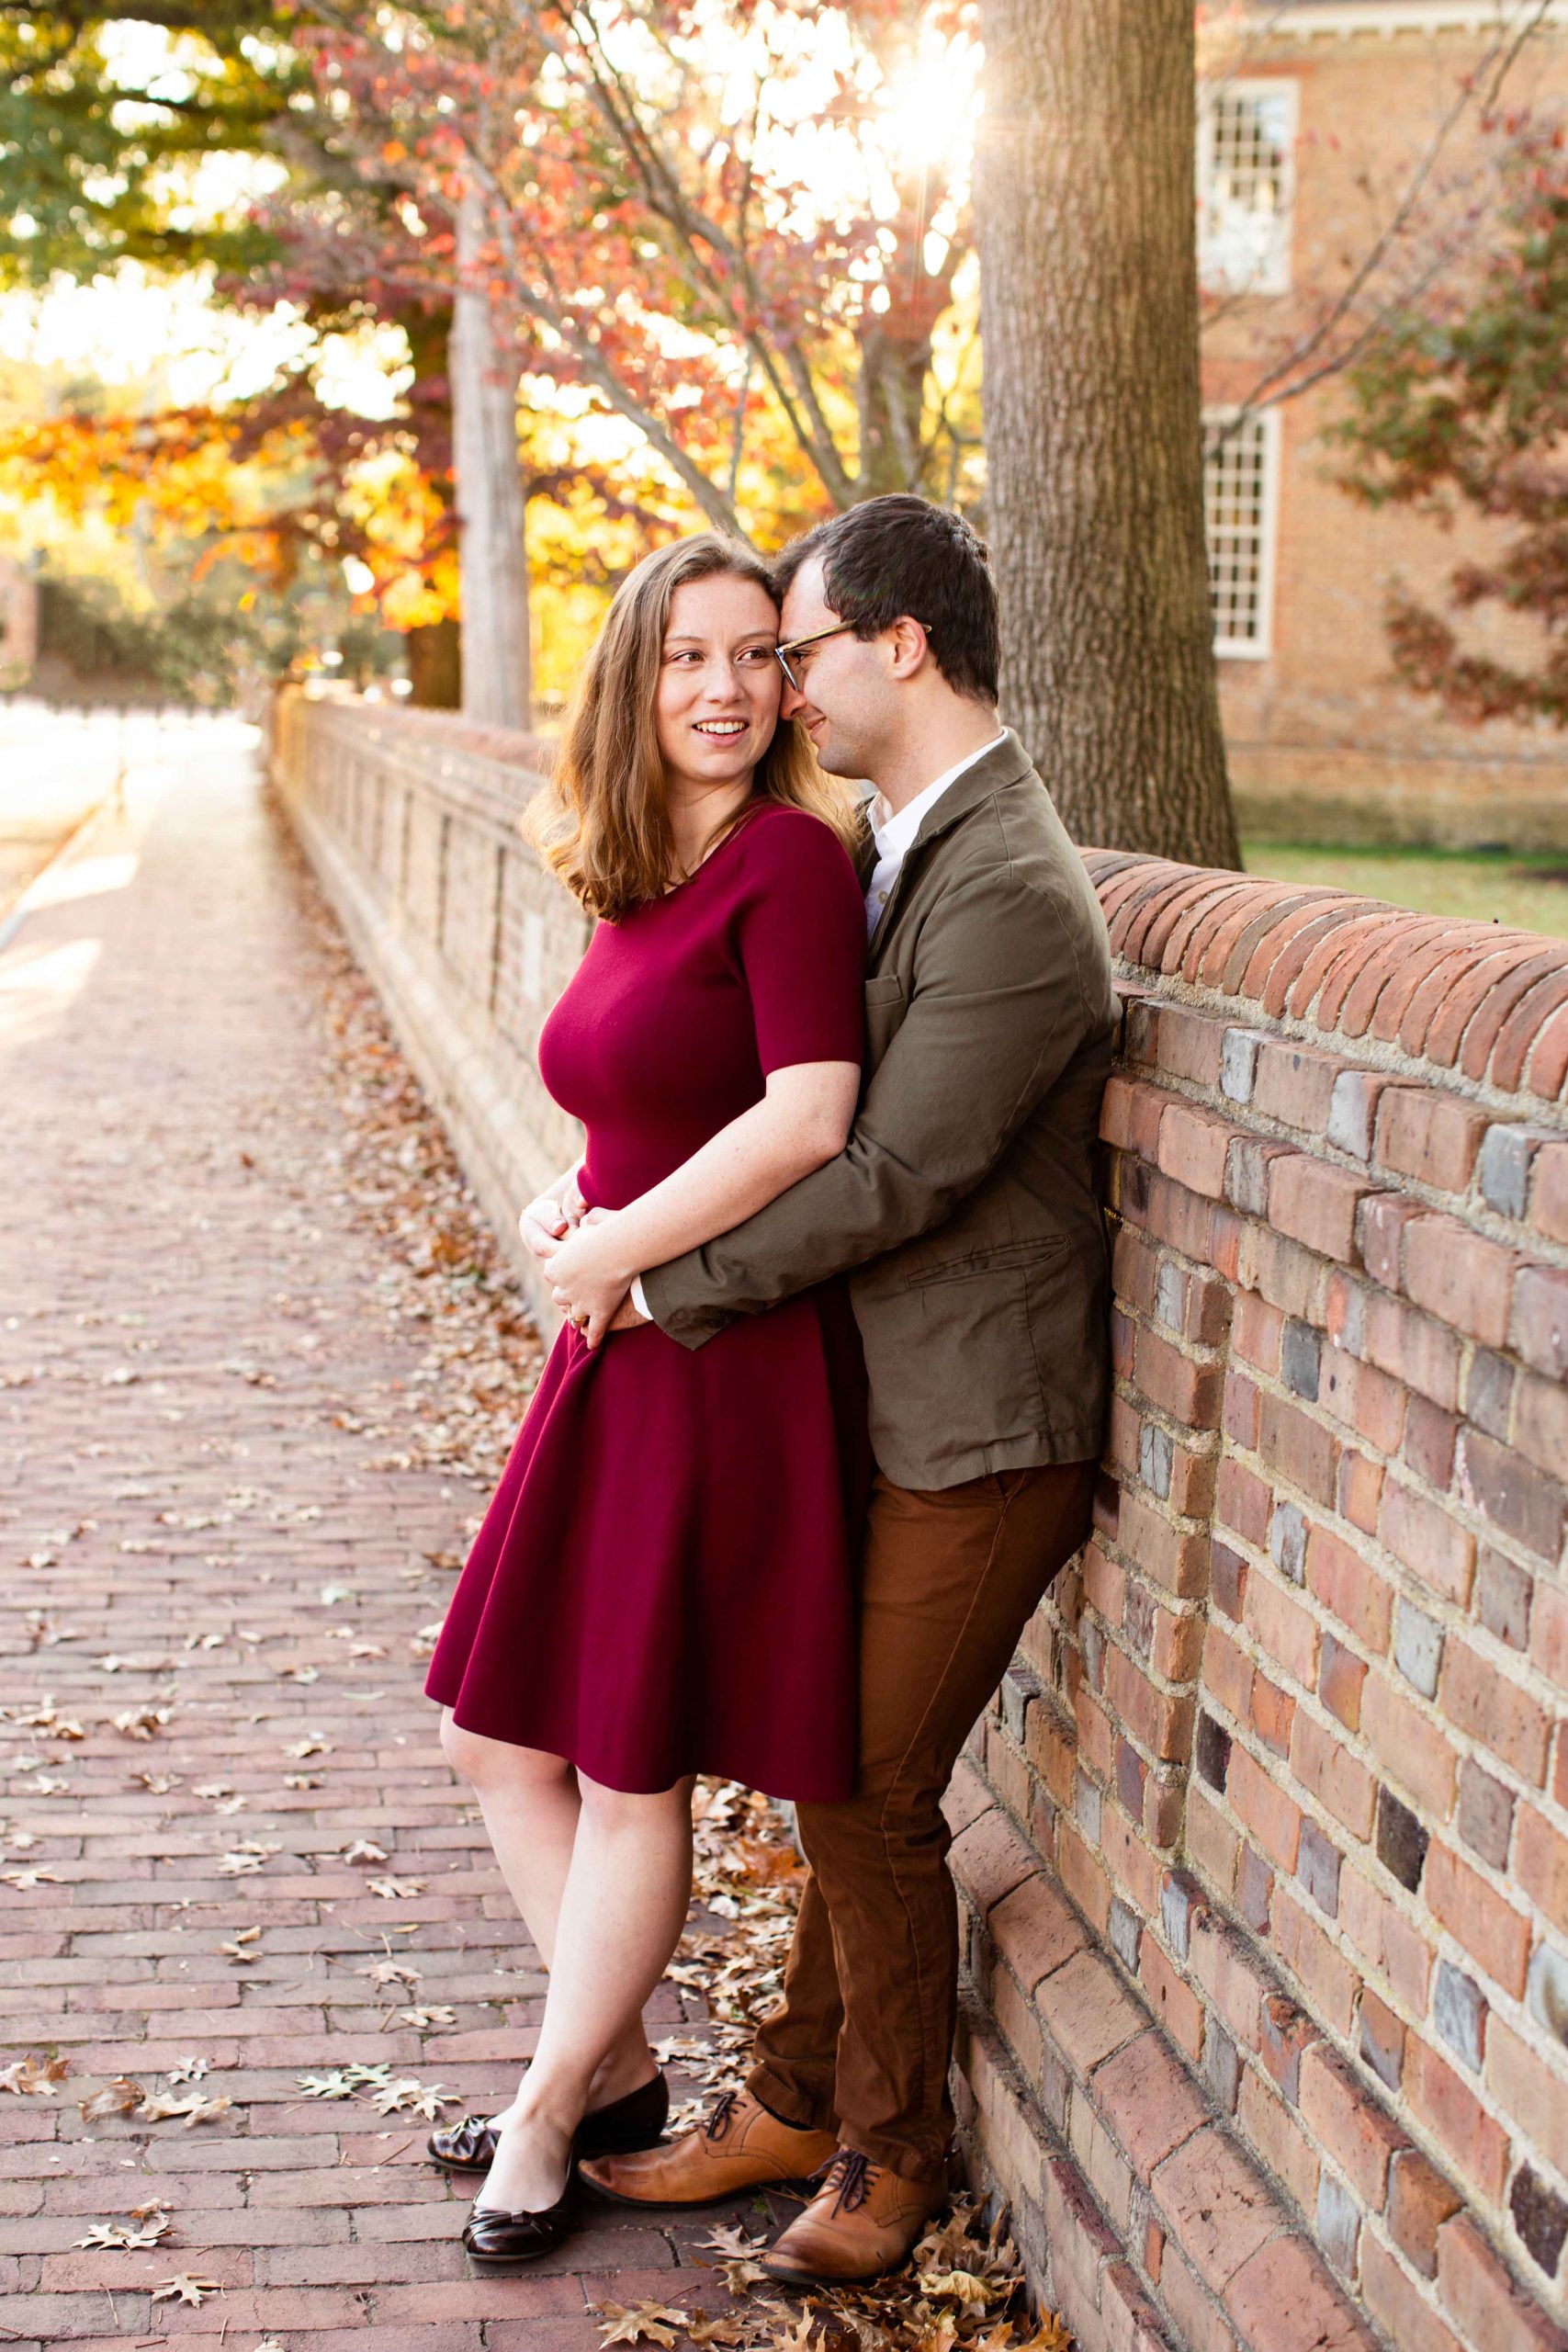 Williamsburg Engagement Shoot Photos Oneofakind Photography Fall 2019-216 SOCIAL